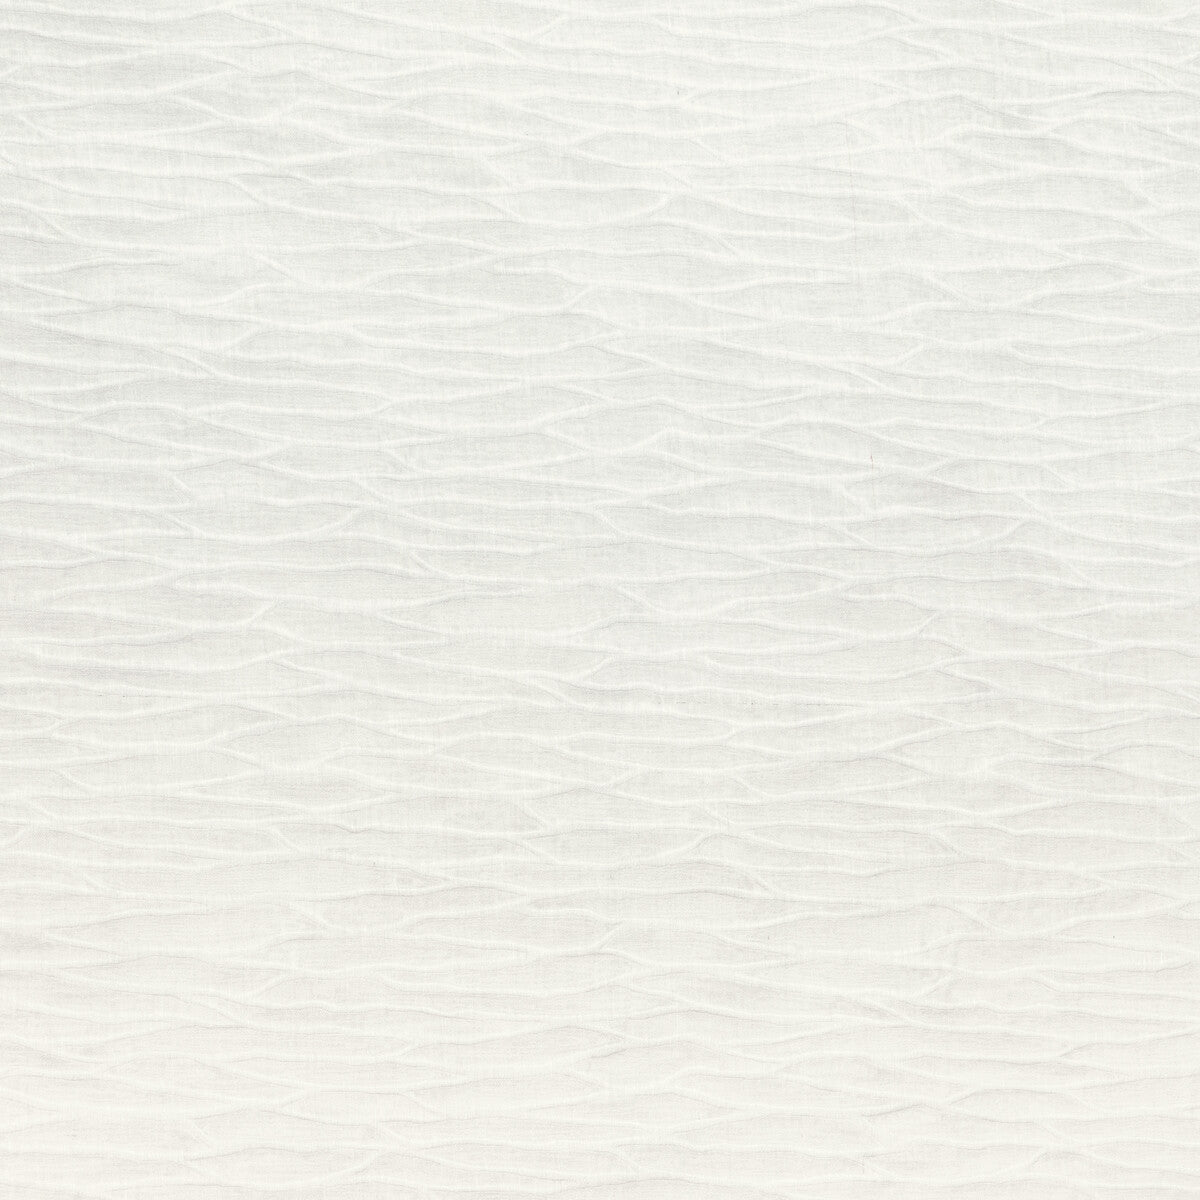 Wavecrest fabric in ivory color - pattern 4855.1.0 - by Kravet Basics in the Monterey collection